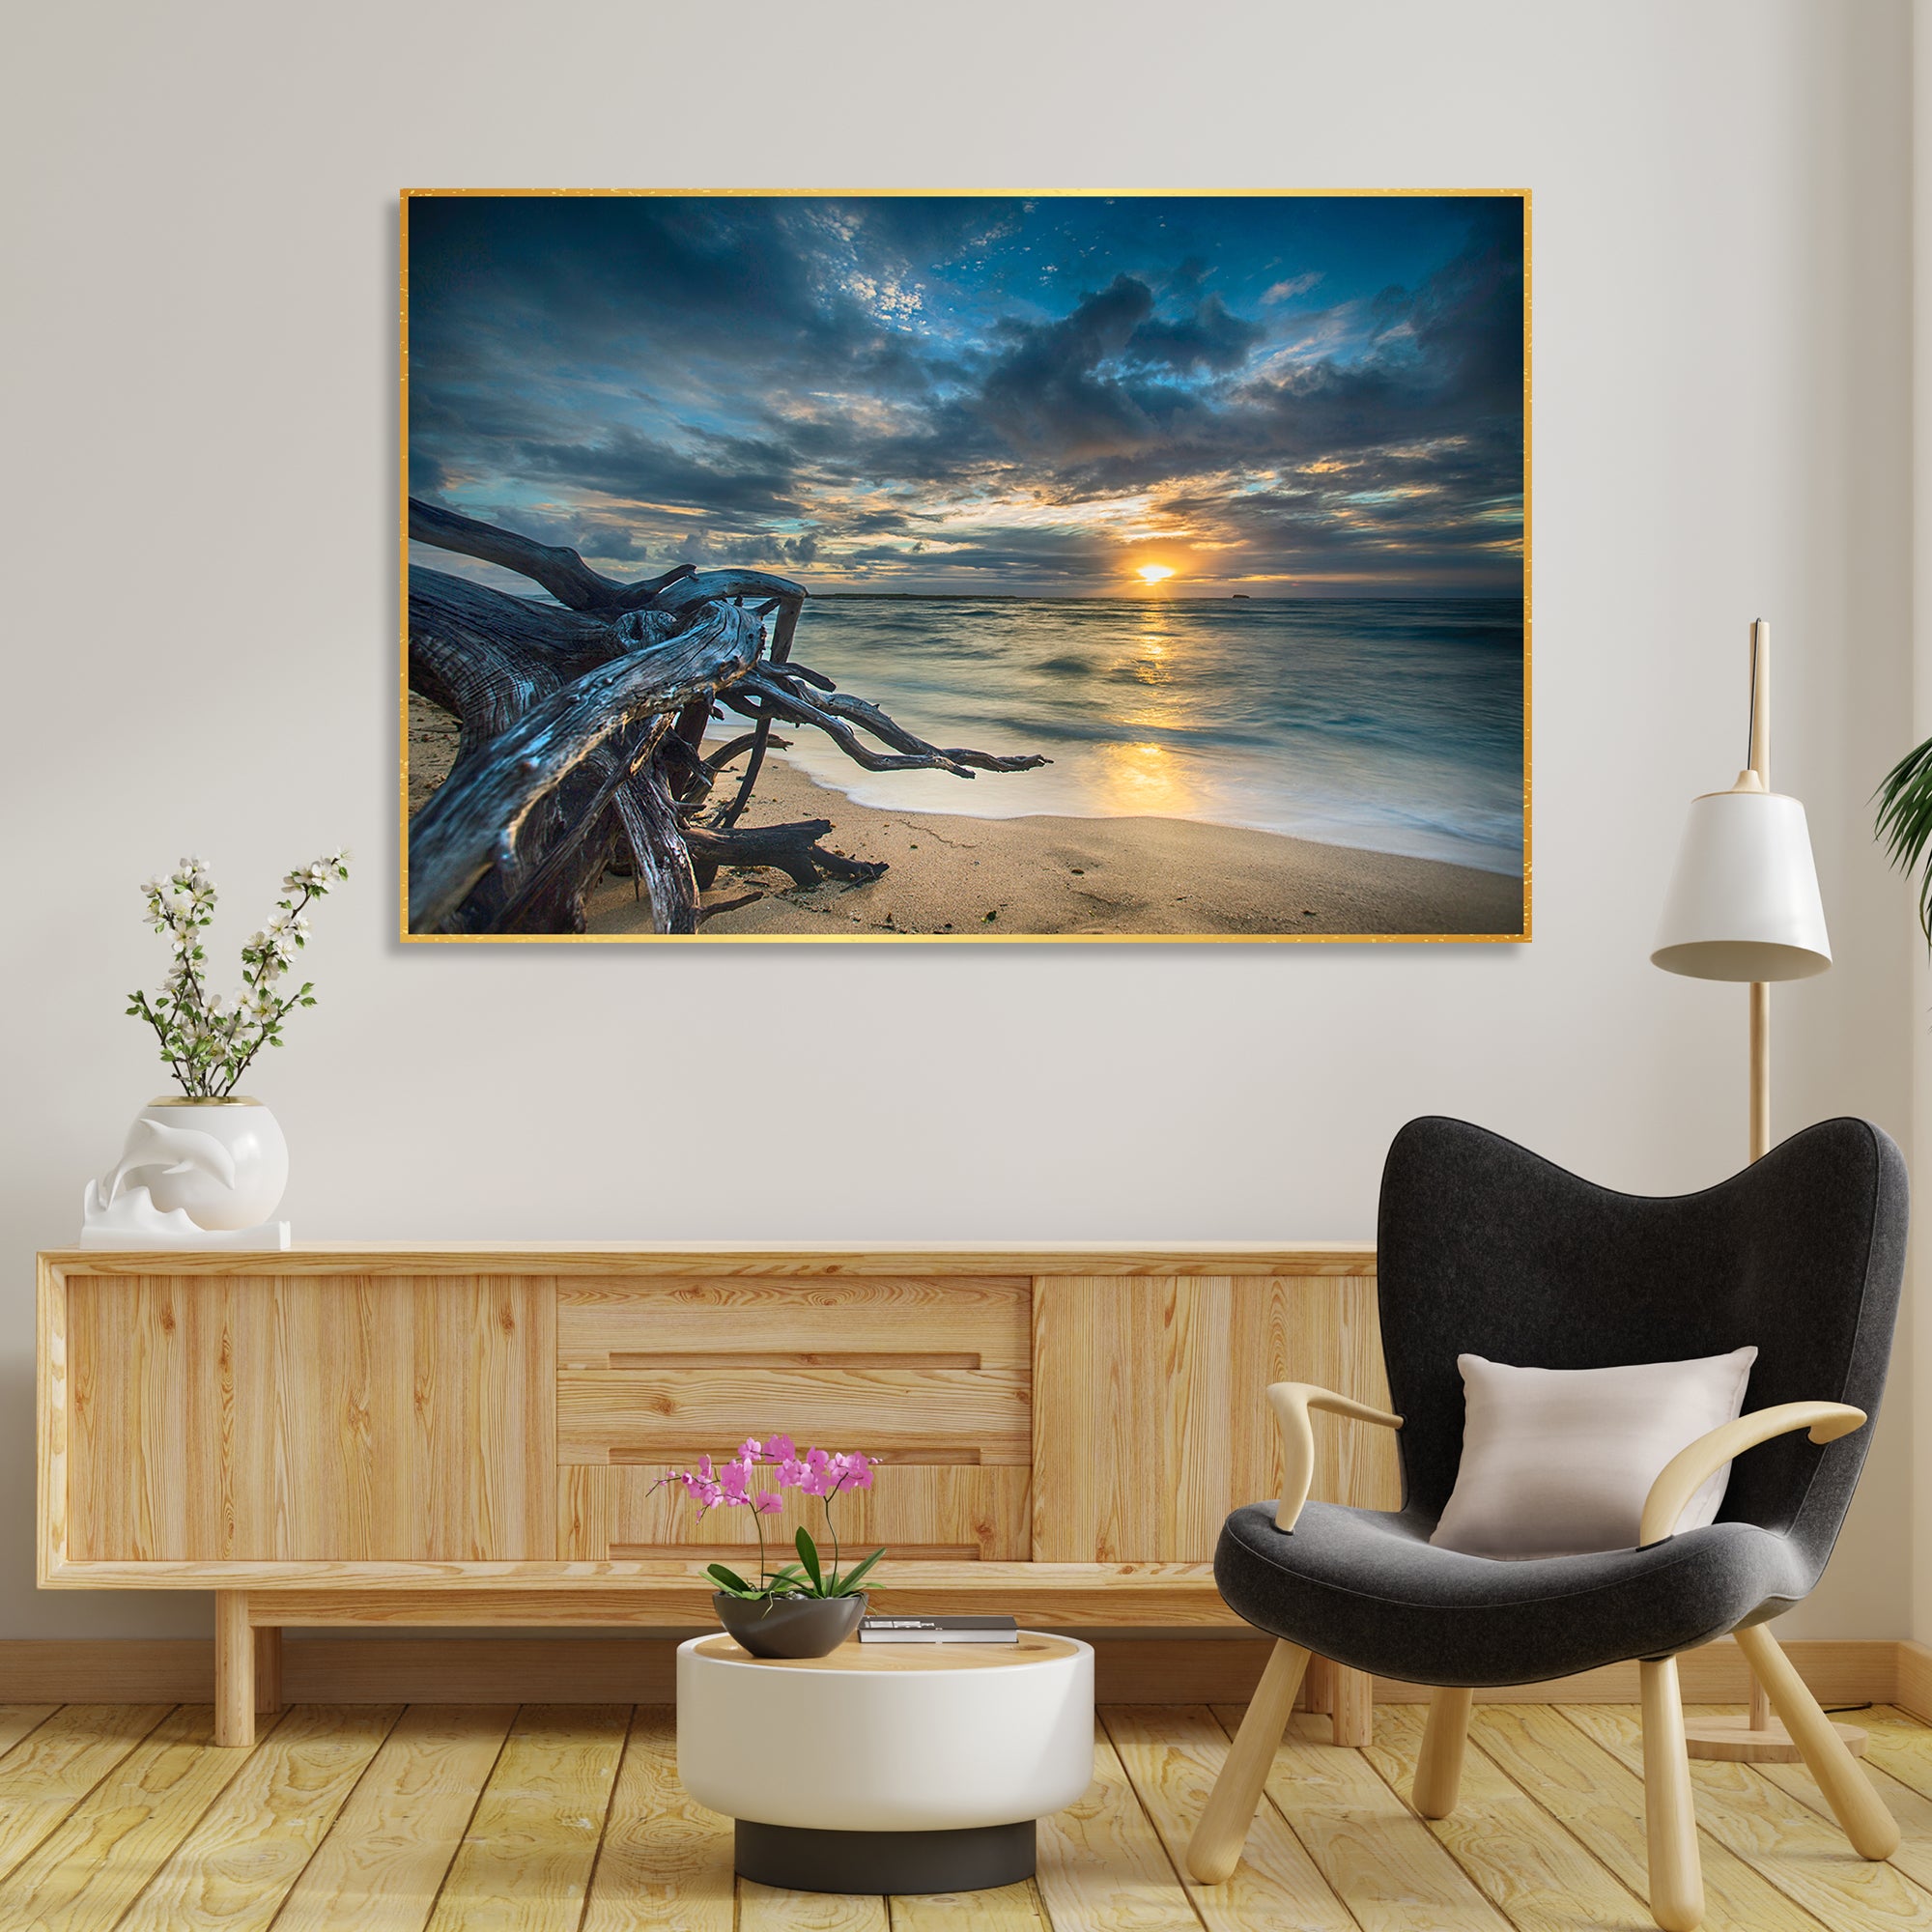 Sunset at Beach Field Wall Painting Floating Canvas